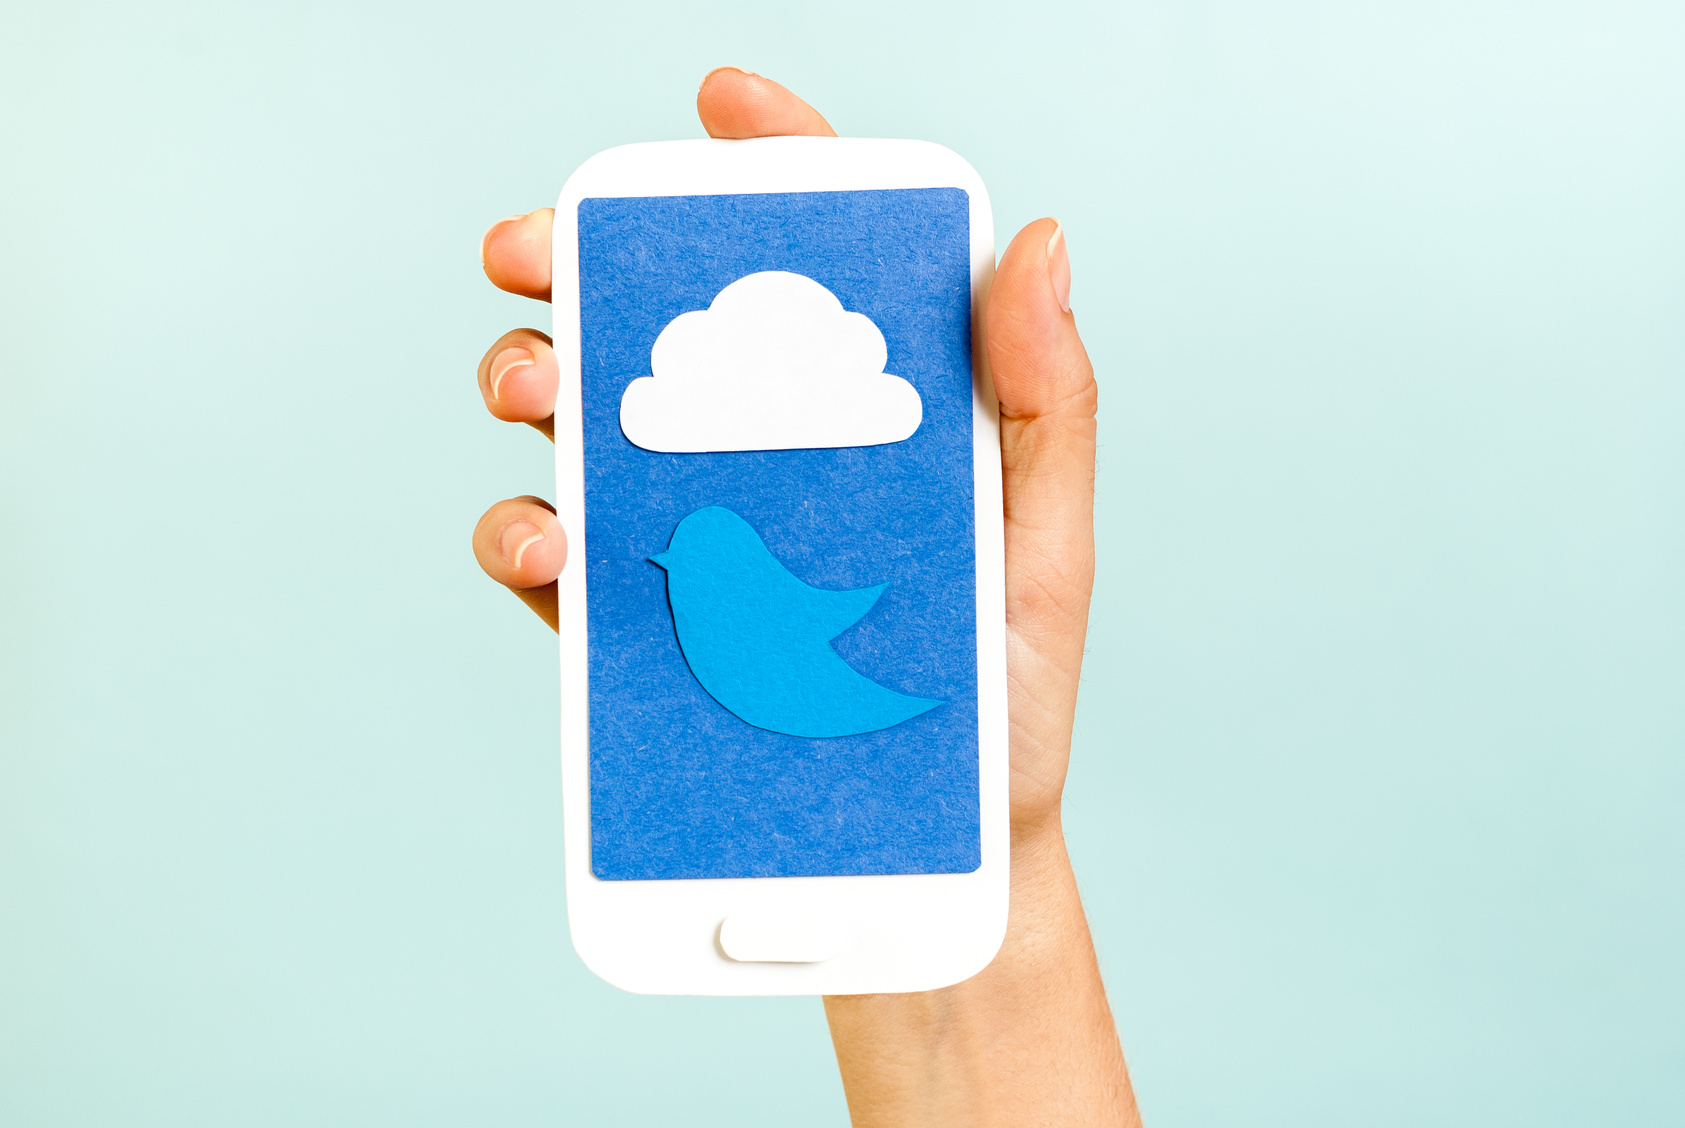 Conceptual phone showing a cloud and bird on blue background